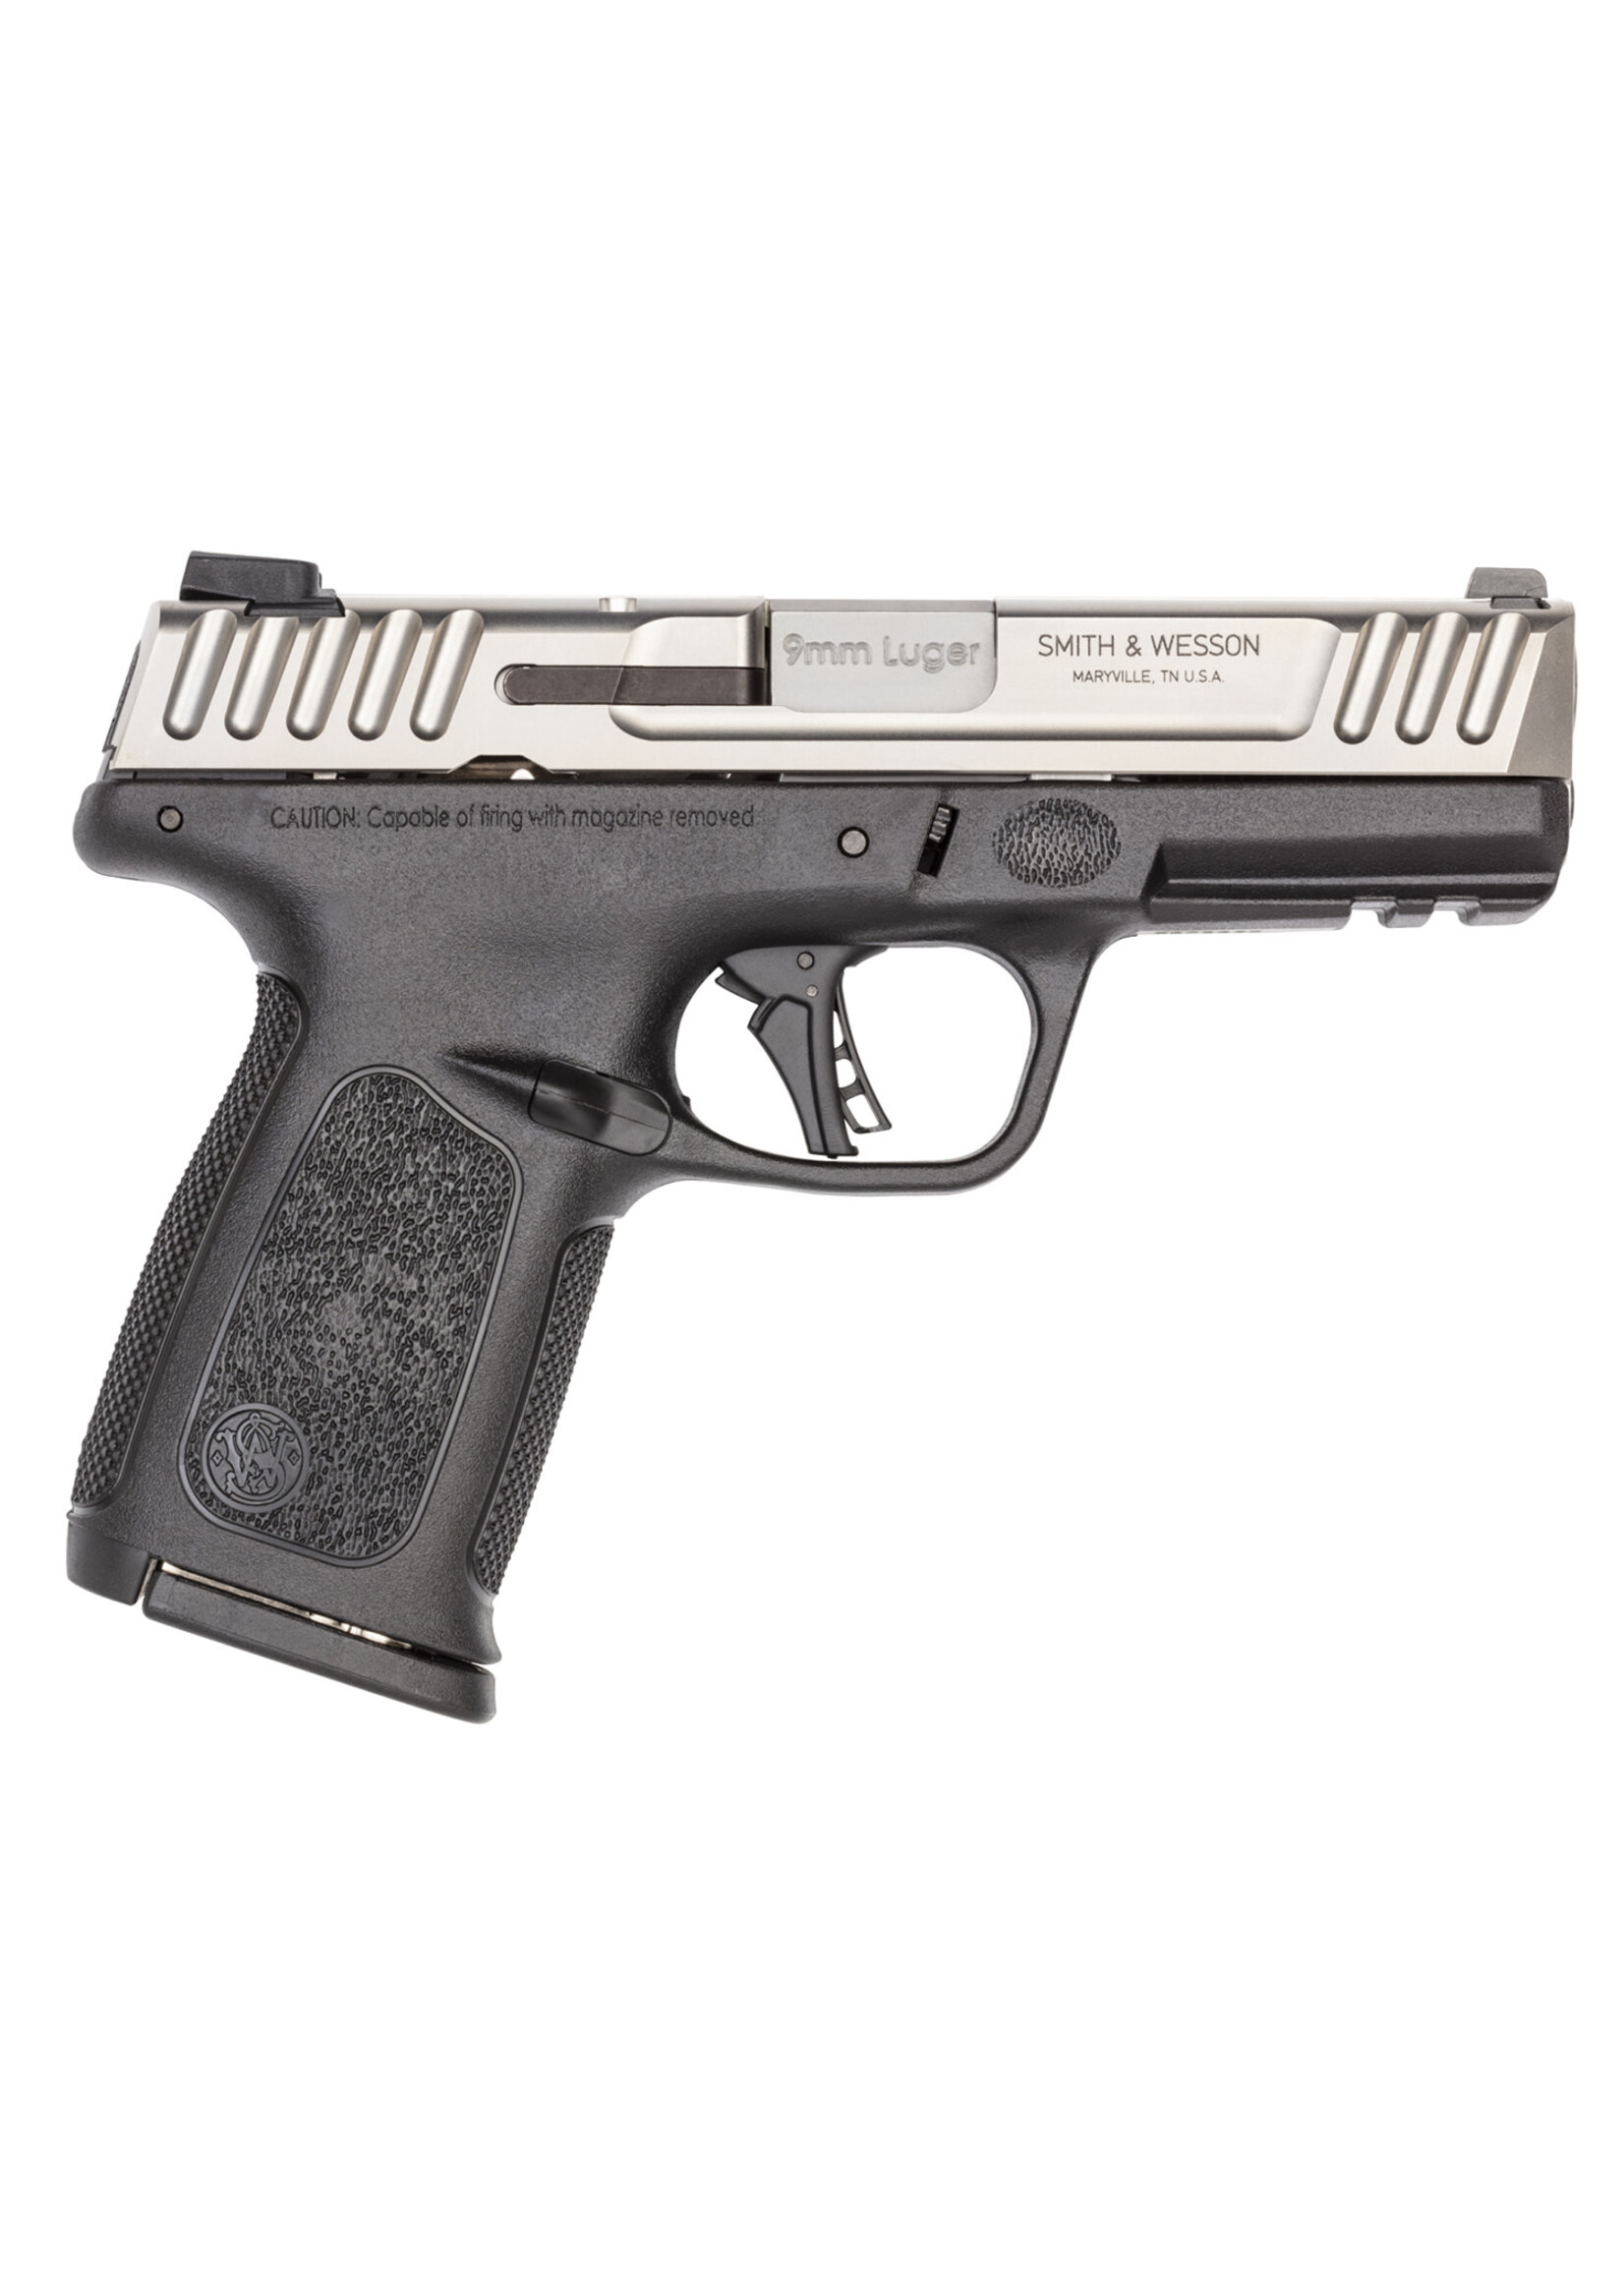 Smith and Wesson (S&W) Smith & Wesson 13931 SD9 2.0 Compact Frame 9mm Luger 16+1, 4" Stainless Steel Barrel, Satin Stainless Steel Serrated Slide, Black Polymer Frame w/Picatinny Rail, Black Textured Polymer Grip